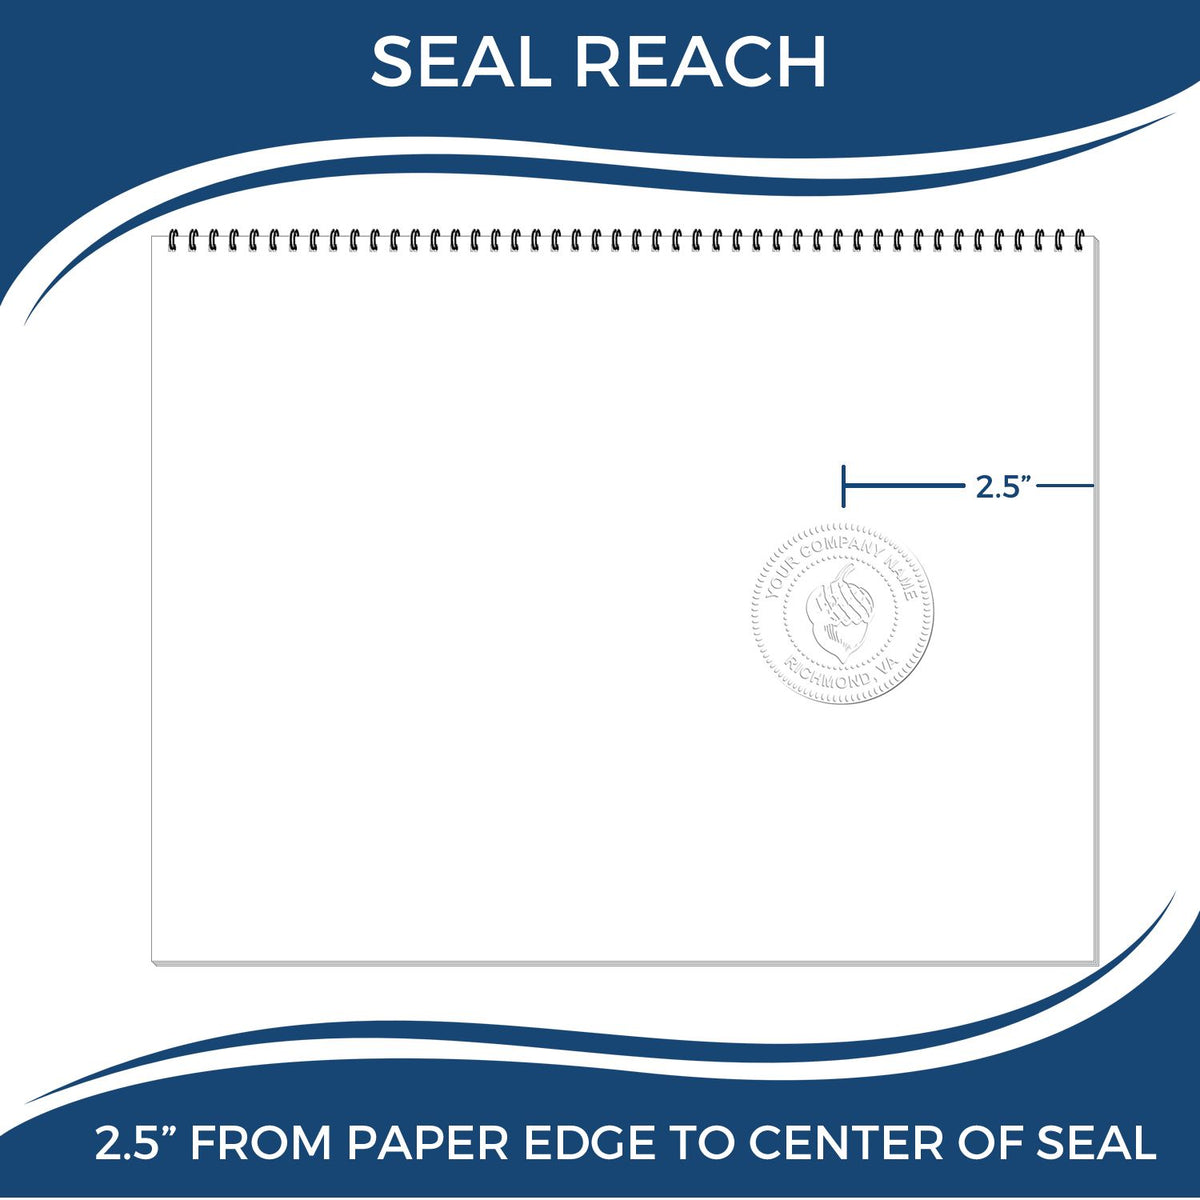 An infographic showing the seal reach which is represented by a ruler and a miniature seal image of the State of Alabama Long Reach Architectural Embossing Seal